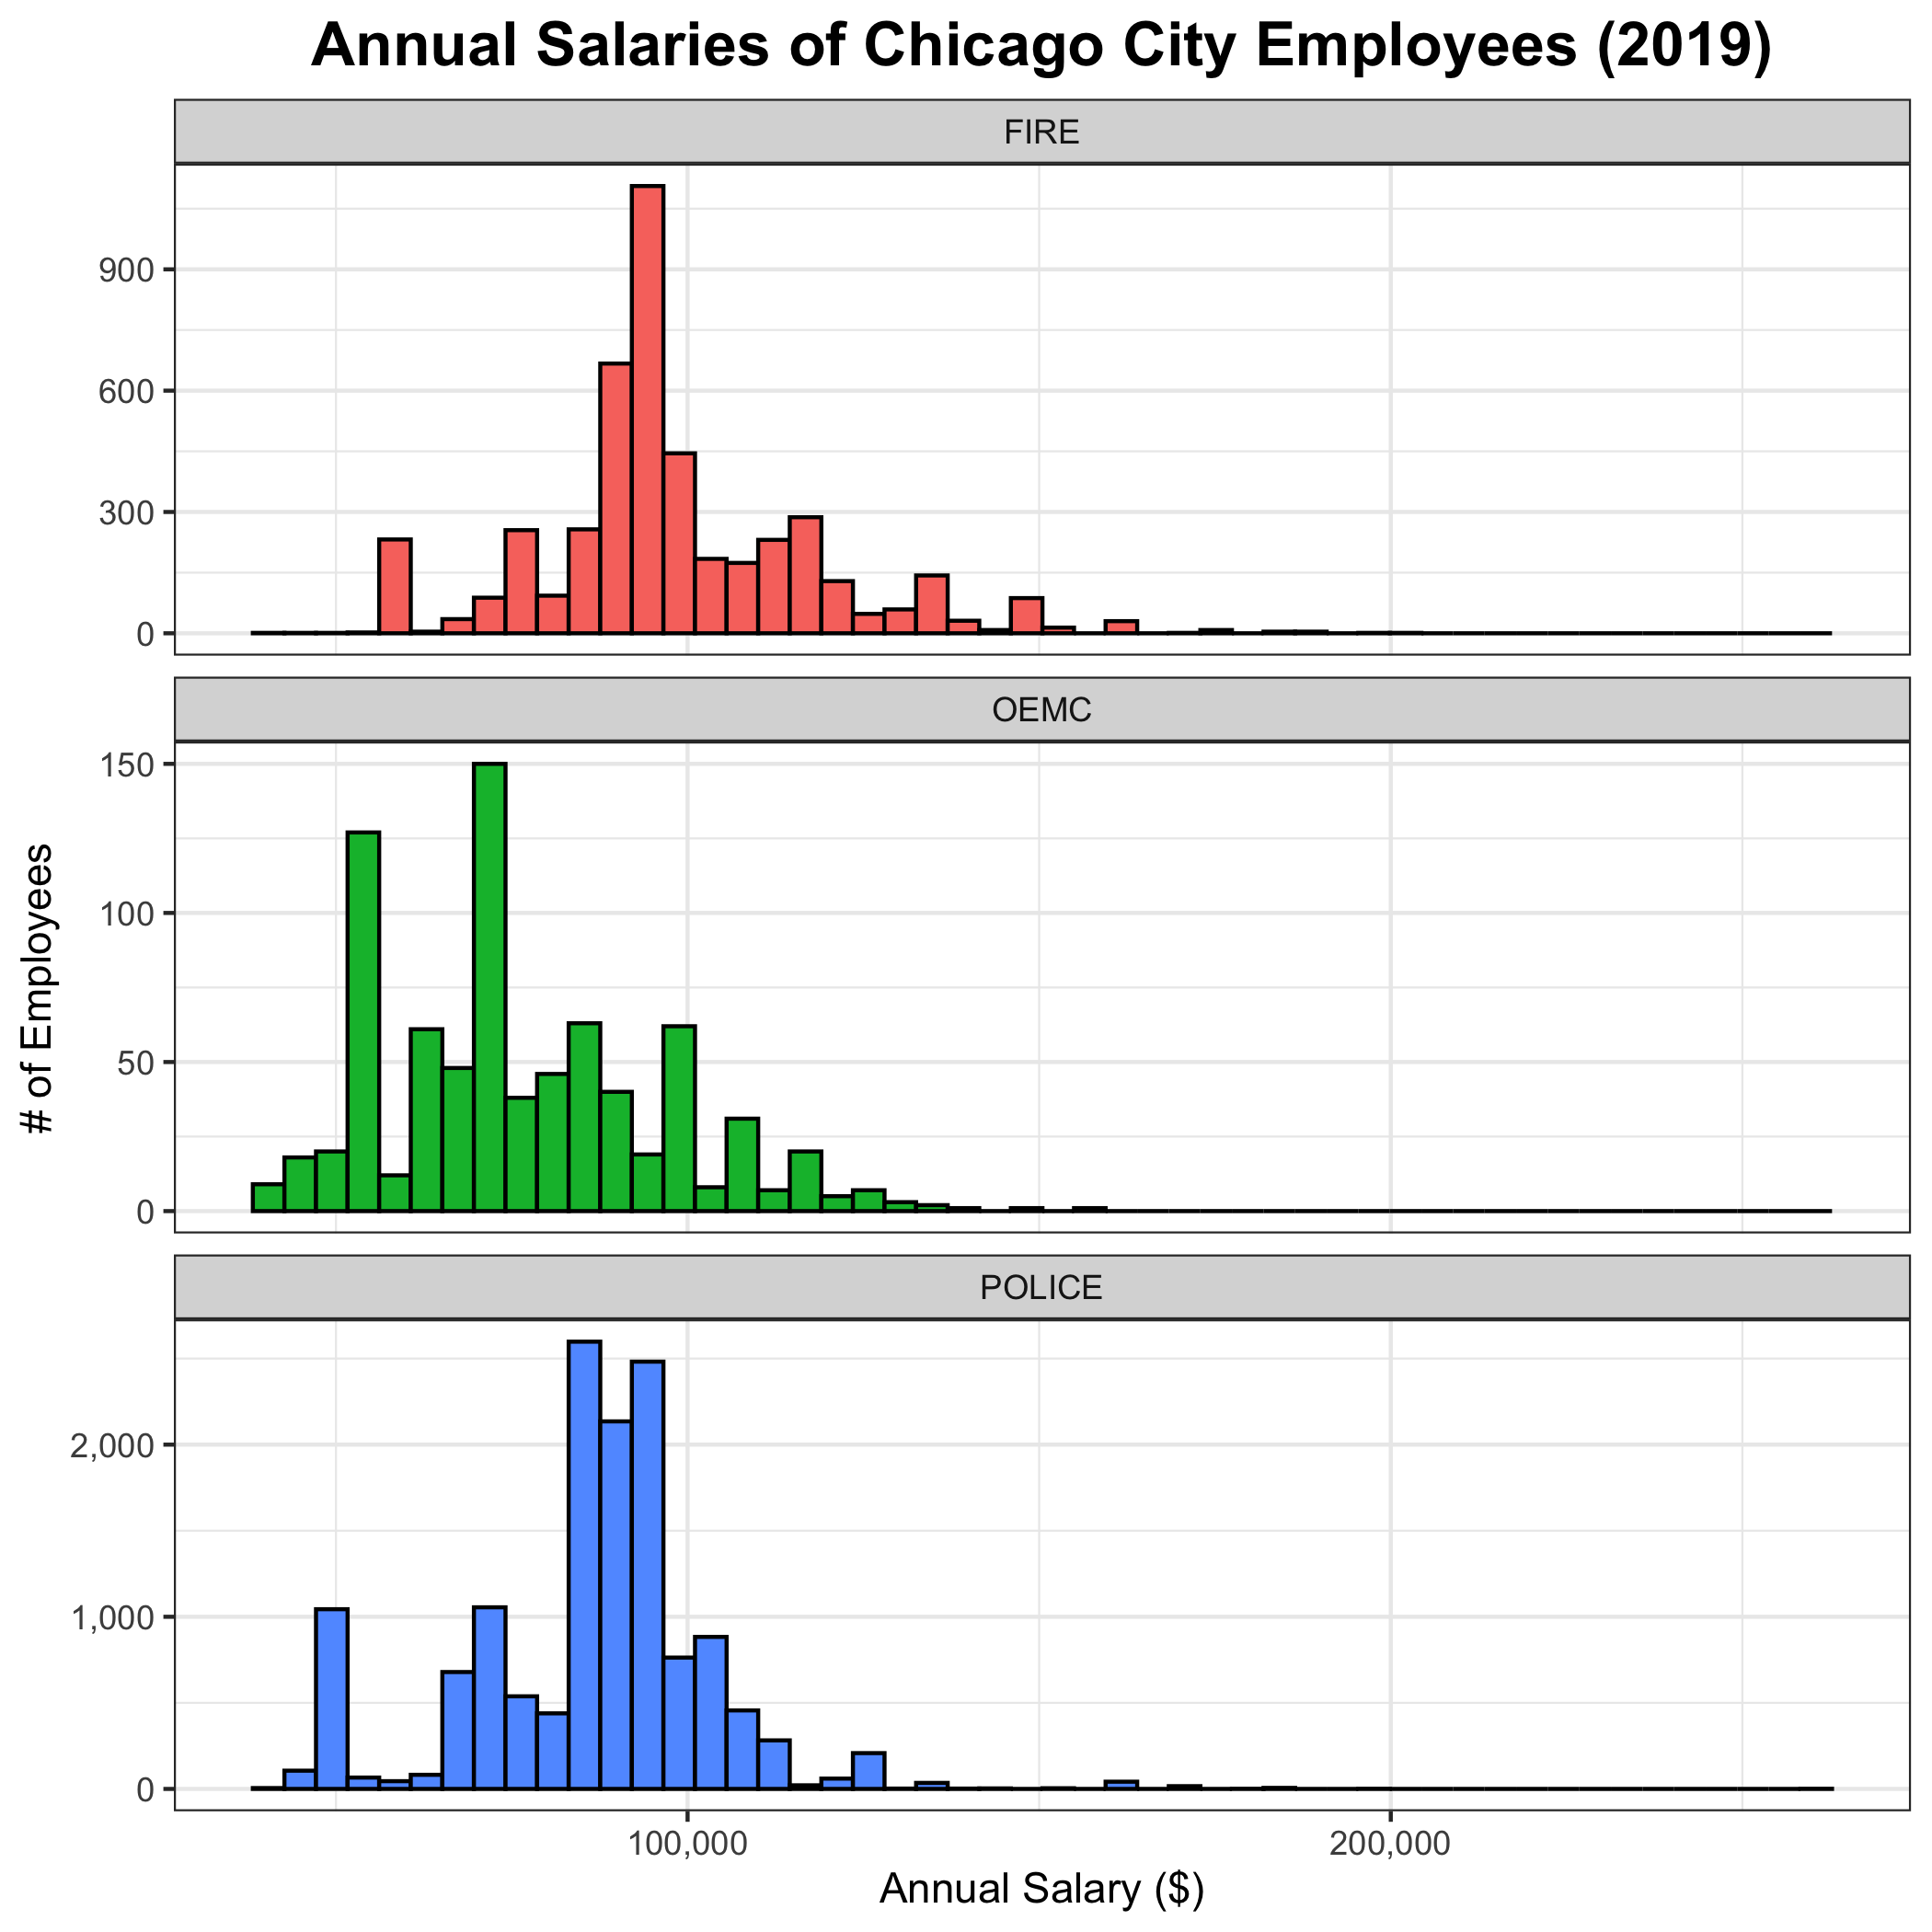 Histograms of annual salaries for 3 large departments of the city of Chicago.